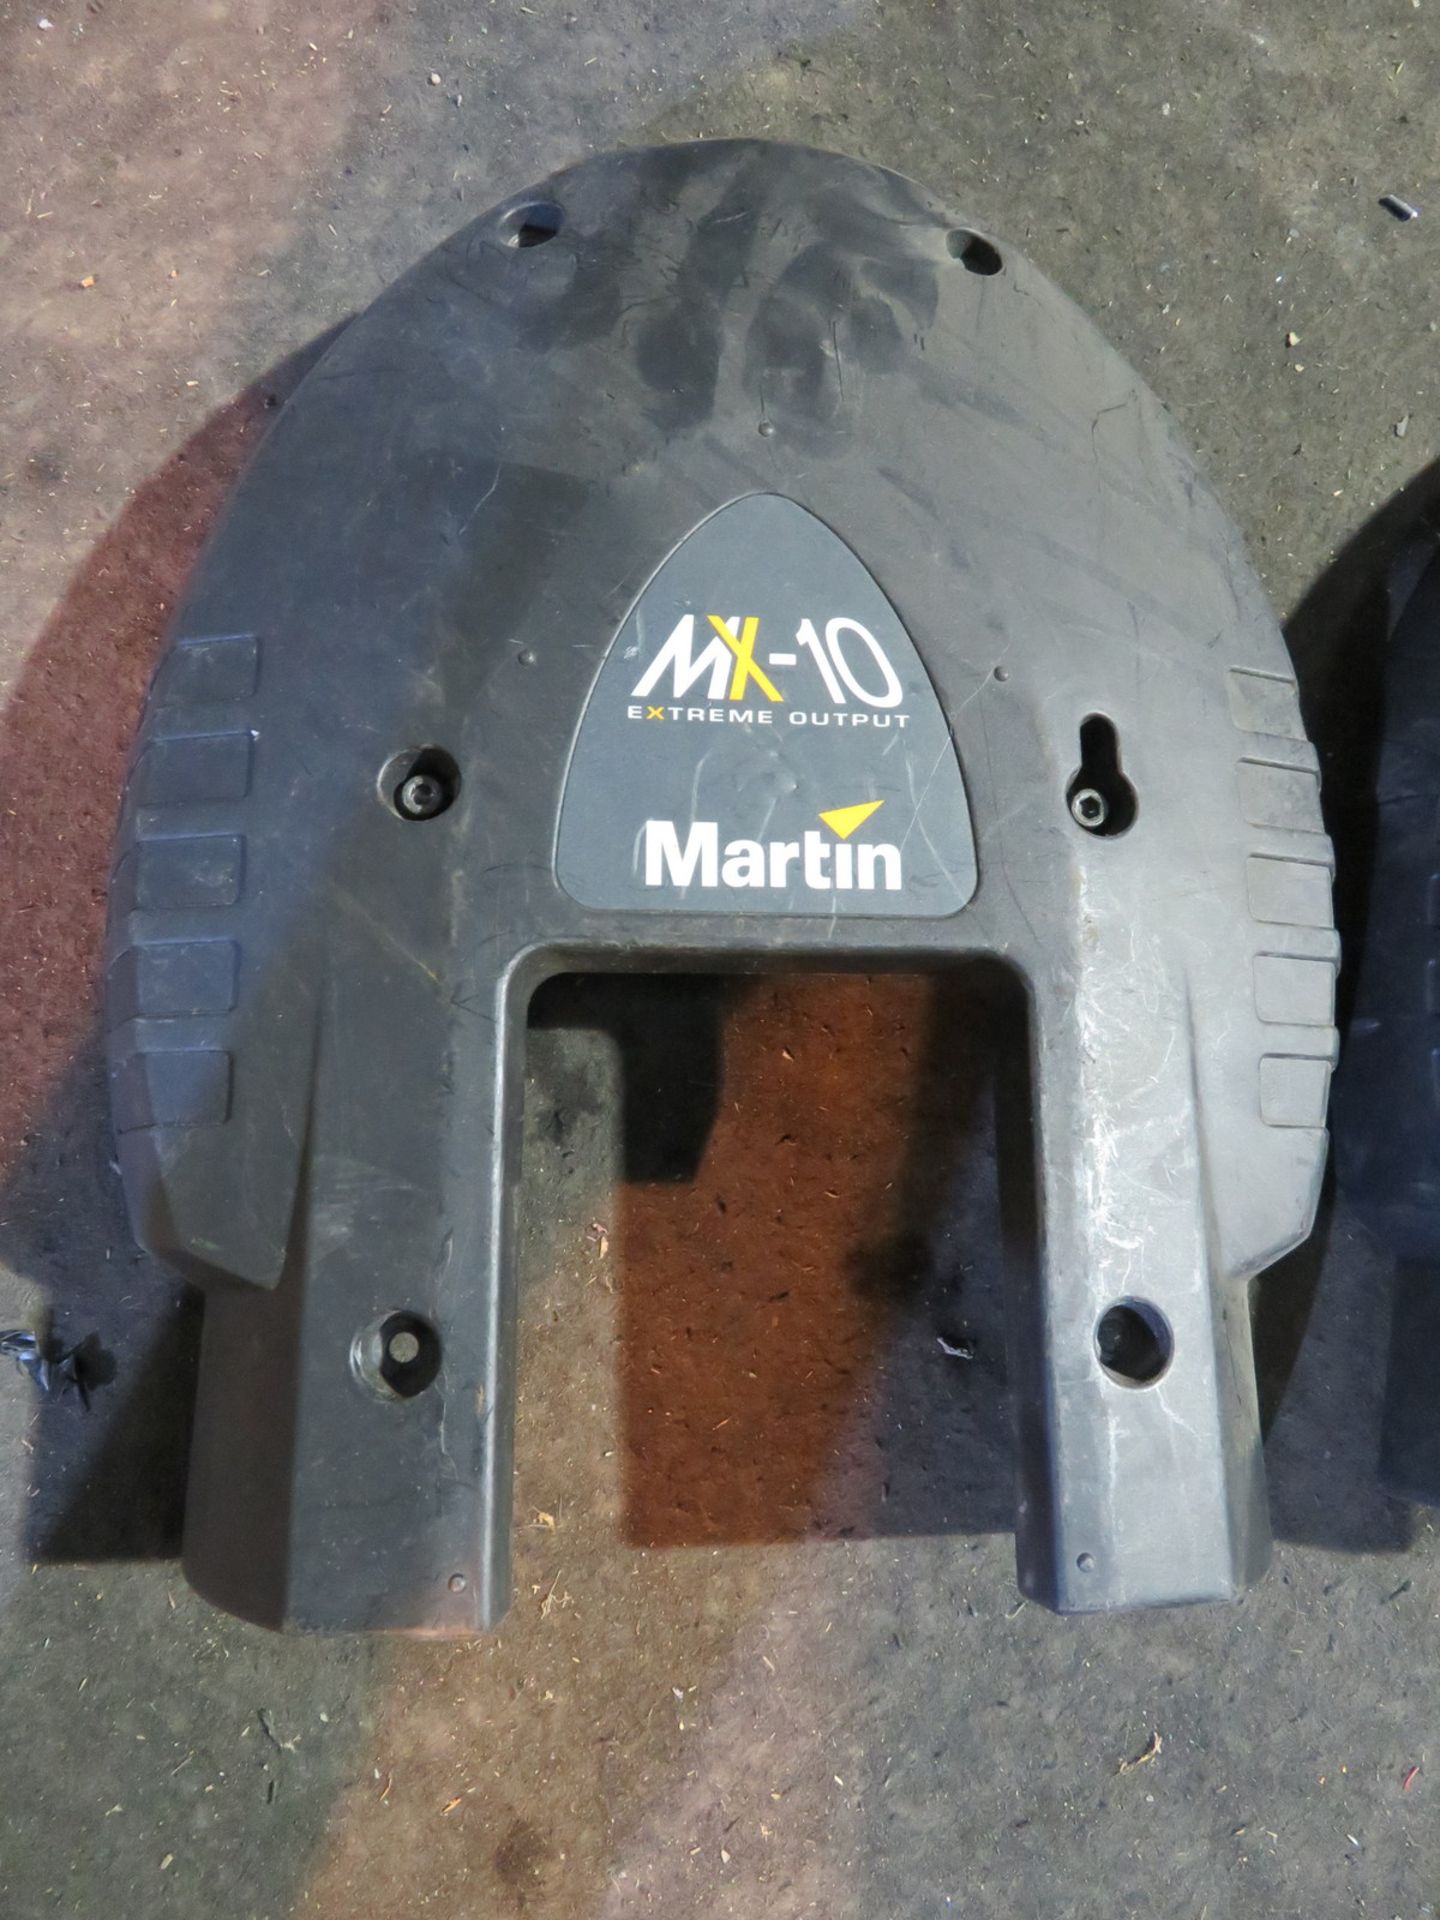 2x covers for Martin MX-10 - Image 3 of 5